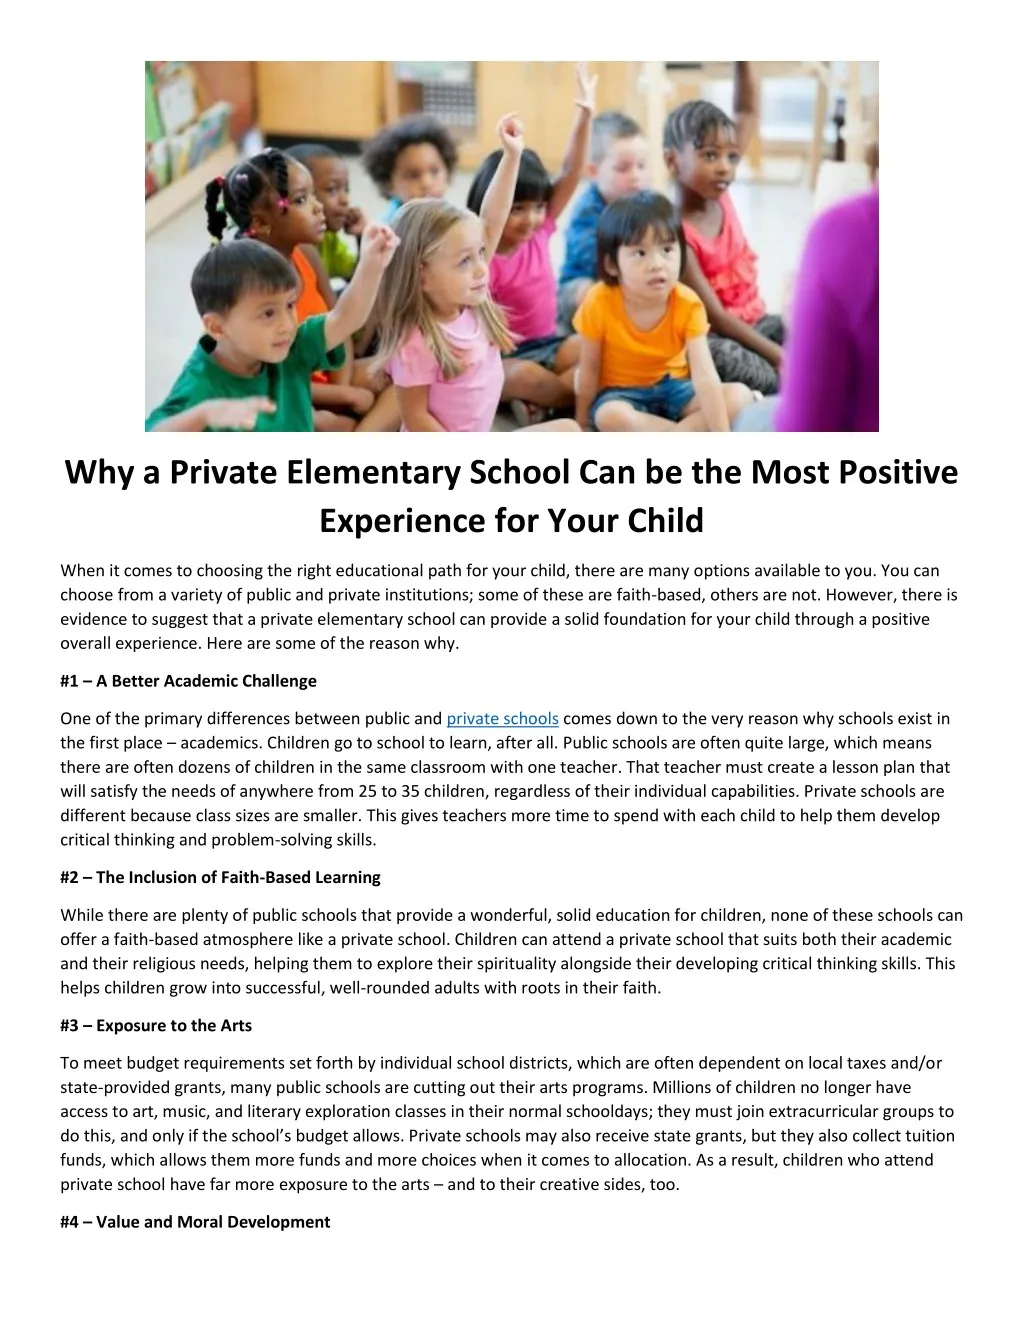 why a private elementary school can be the most